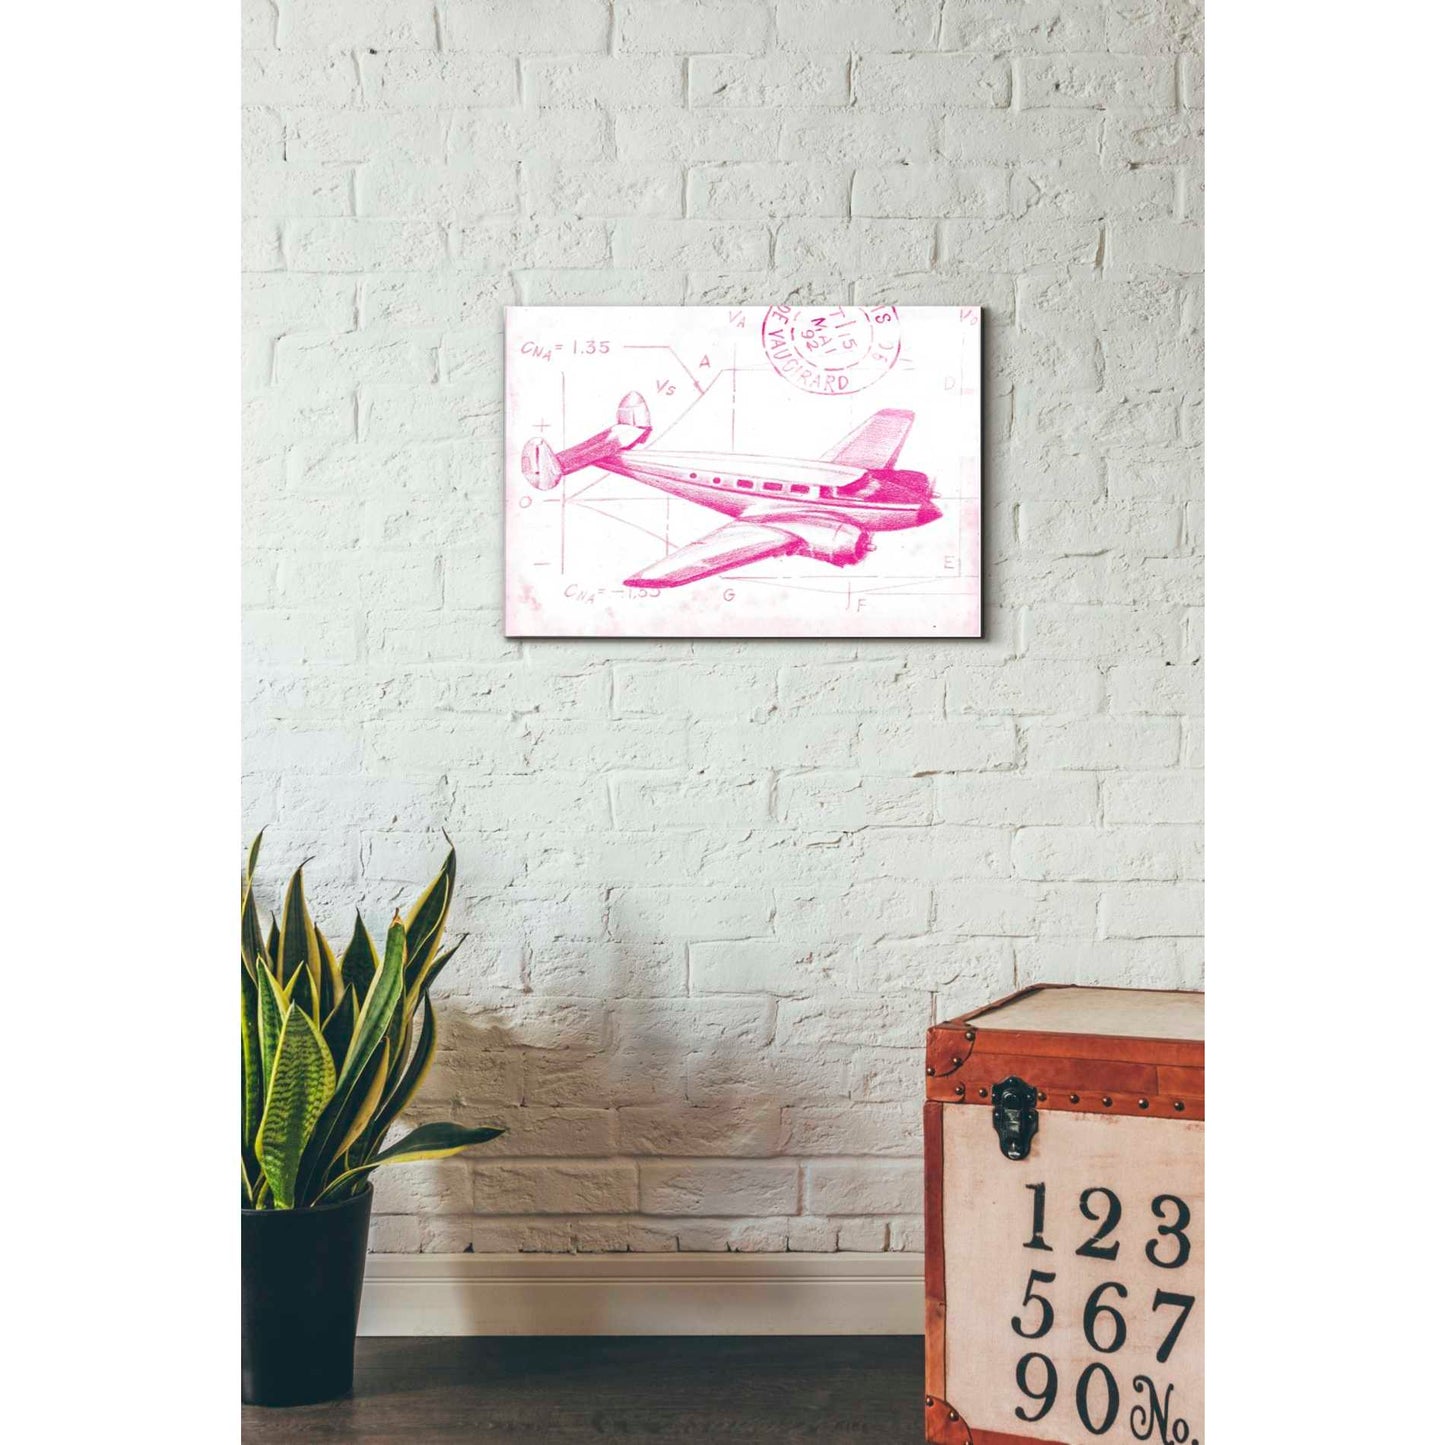 Epic Art 'Flight Schematic IV in Pink' by Ethan Harper Acrylic Glass Wall Art,16x24